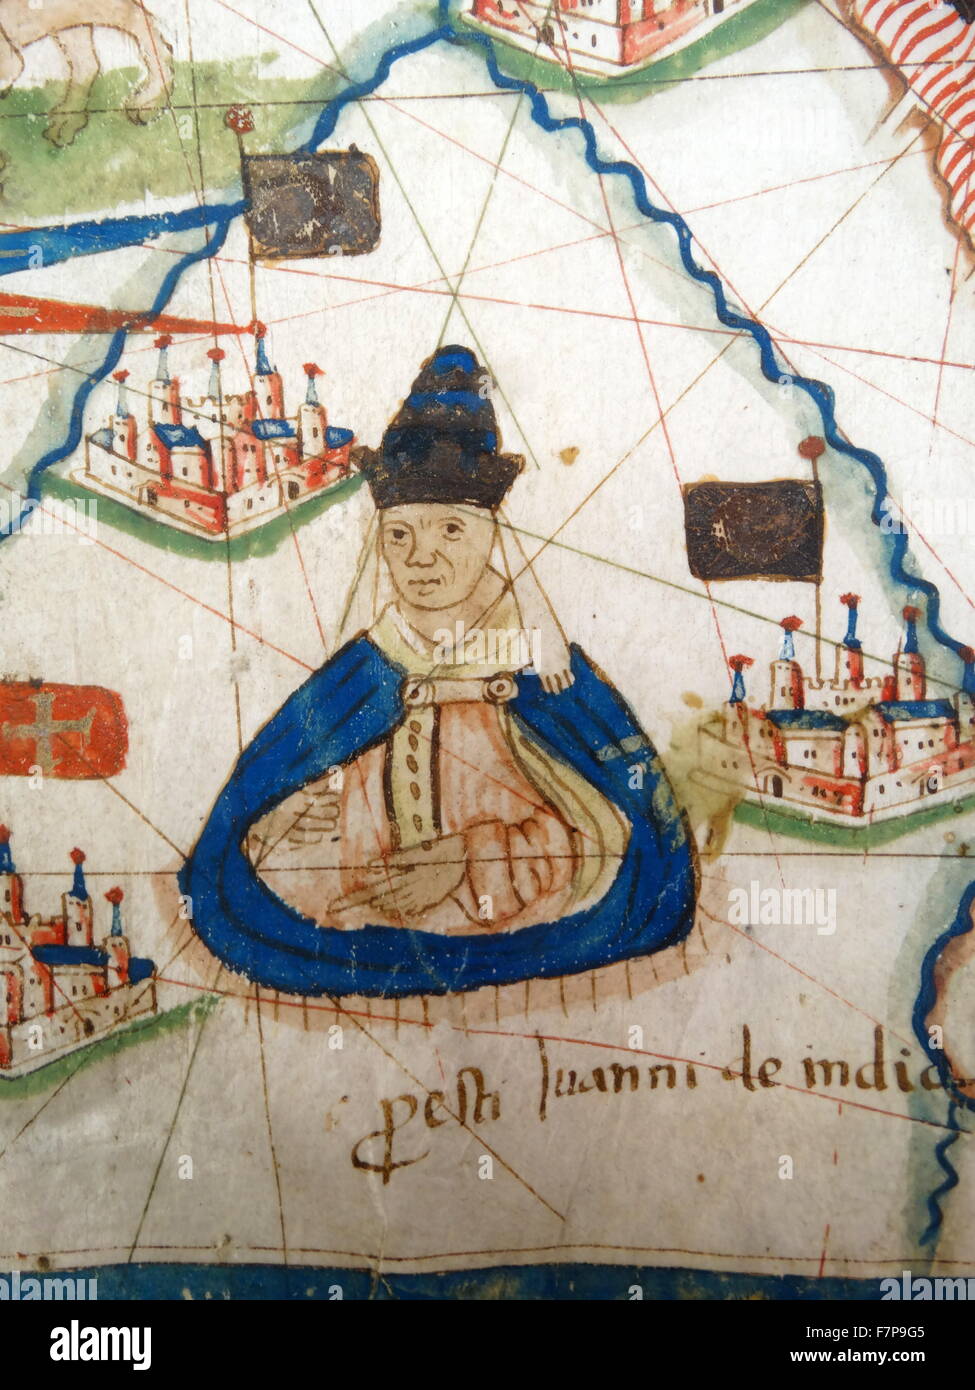 Renaissance map of Europe, Jacopo Russo, 1528, detail showing Prester John (Latin: Presbyter Johannes). Prester john was a legendary Christian patriarch and king popular in European chronicles and tradition from the 12th through the 17th century. He was said to rule over a 'Nestorian' (Church of the East) Christian nation lost amid the Muslims and pagans of the Orient Stock Photo